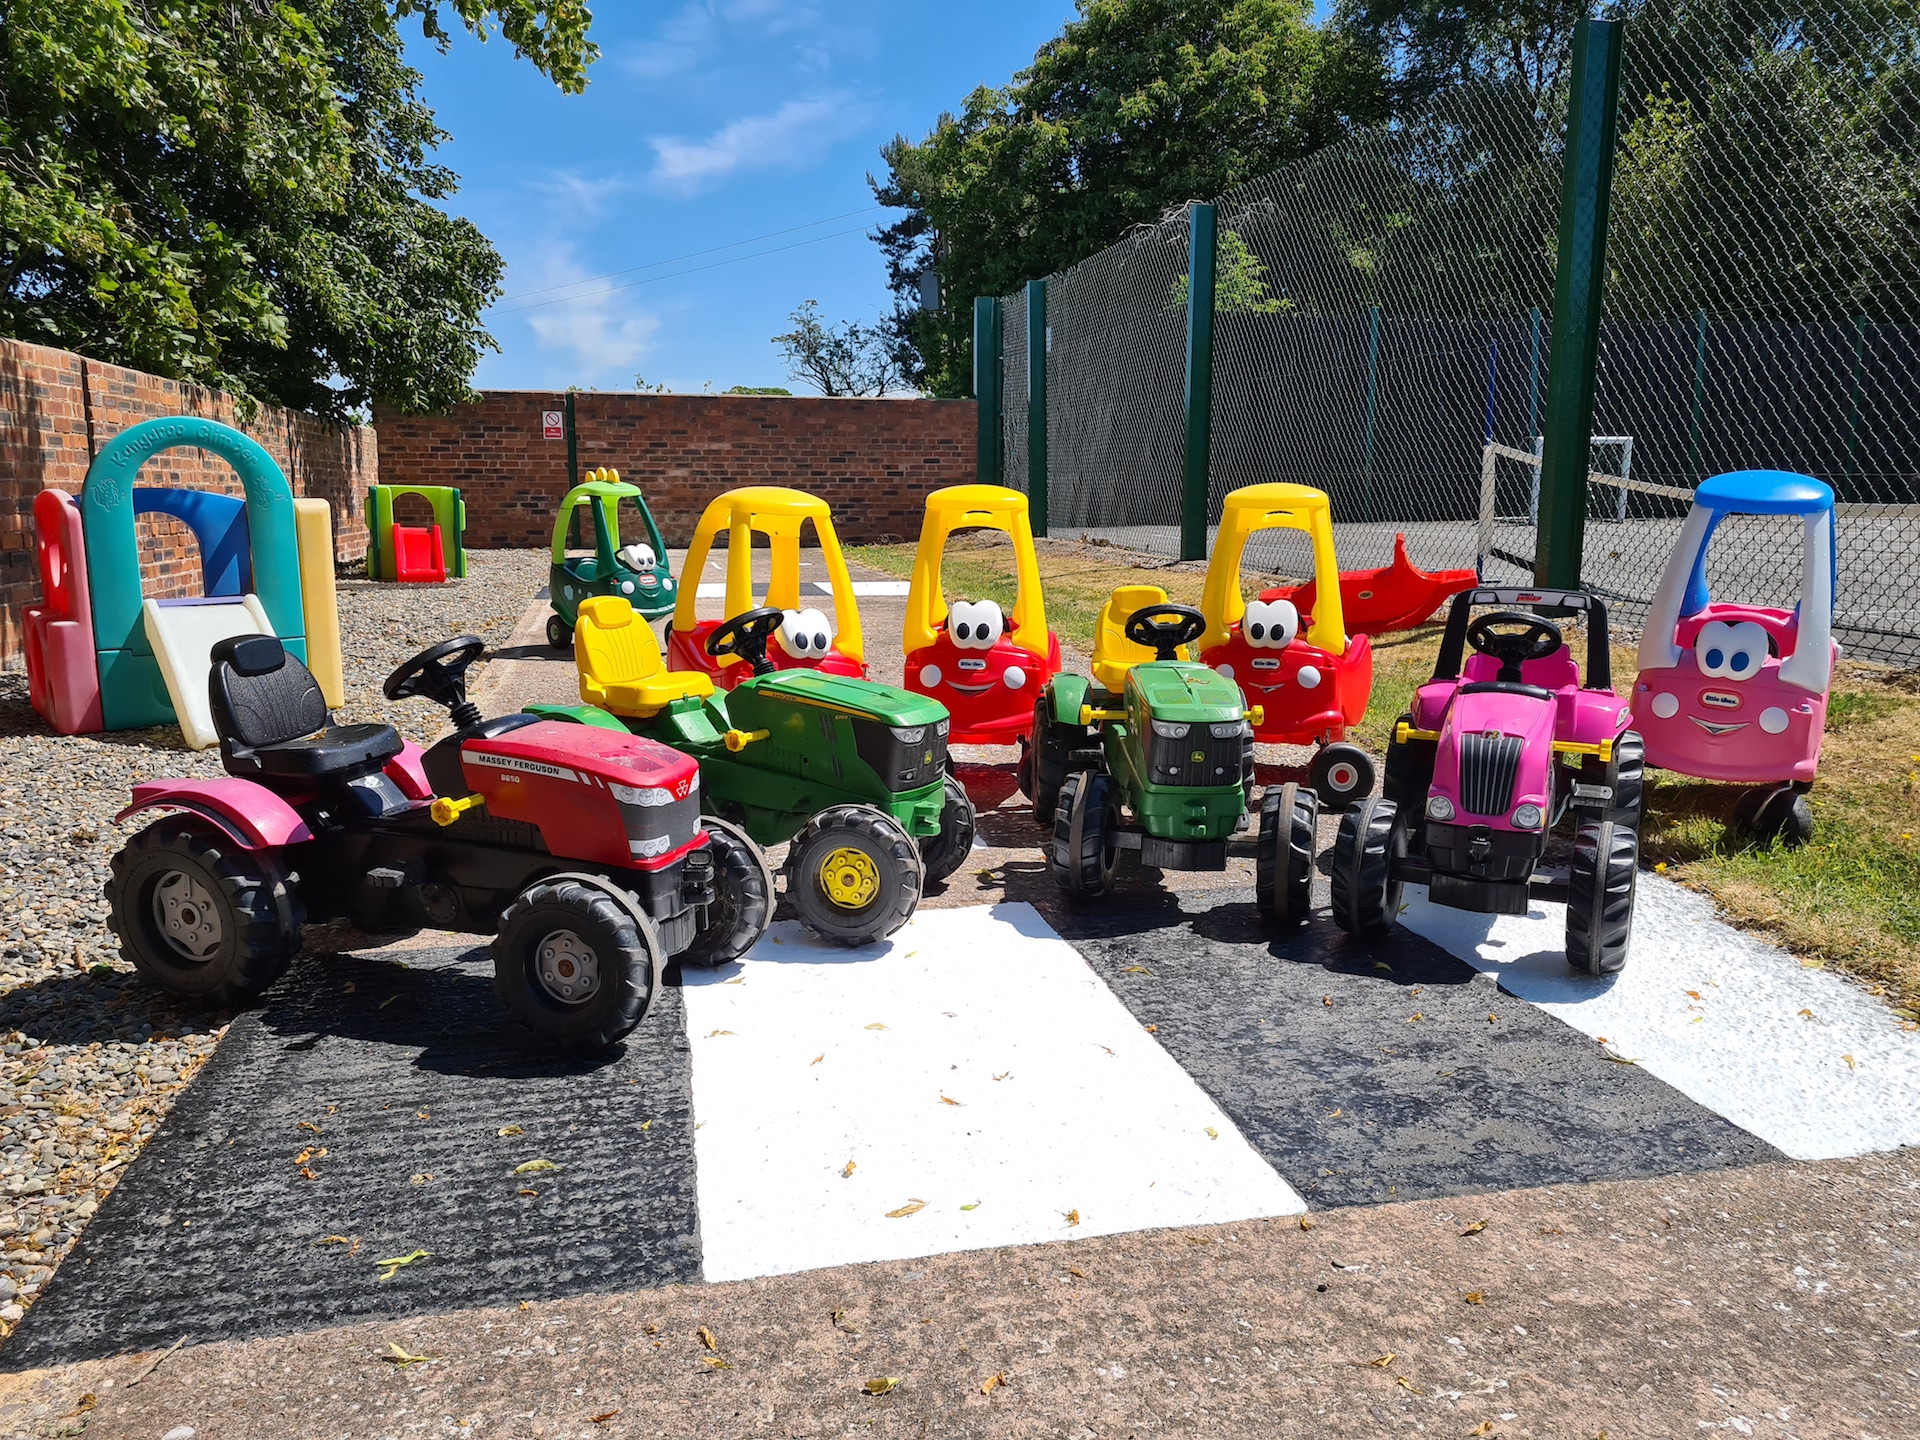 childrens pedal cars lined up in a Shropshire holiday cottage garden.